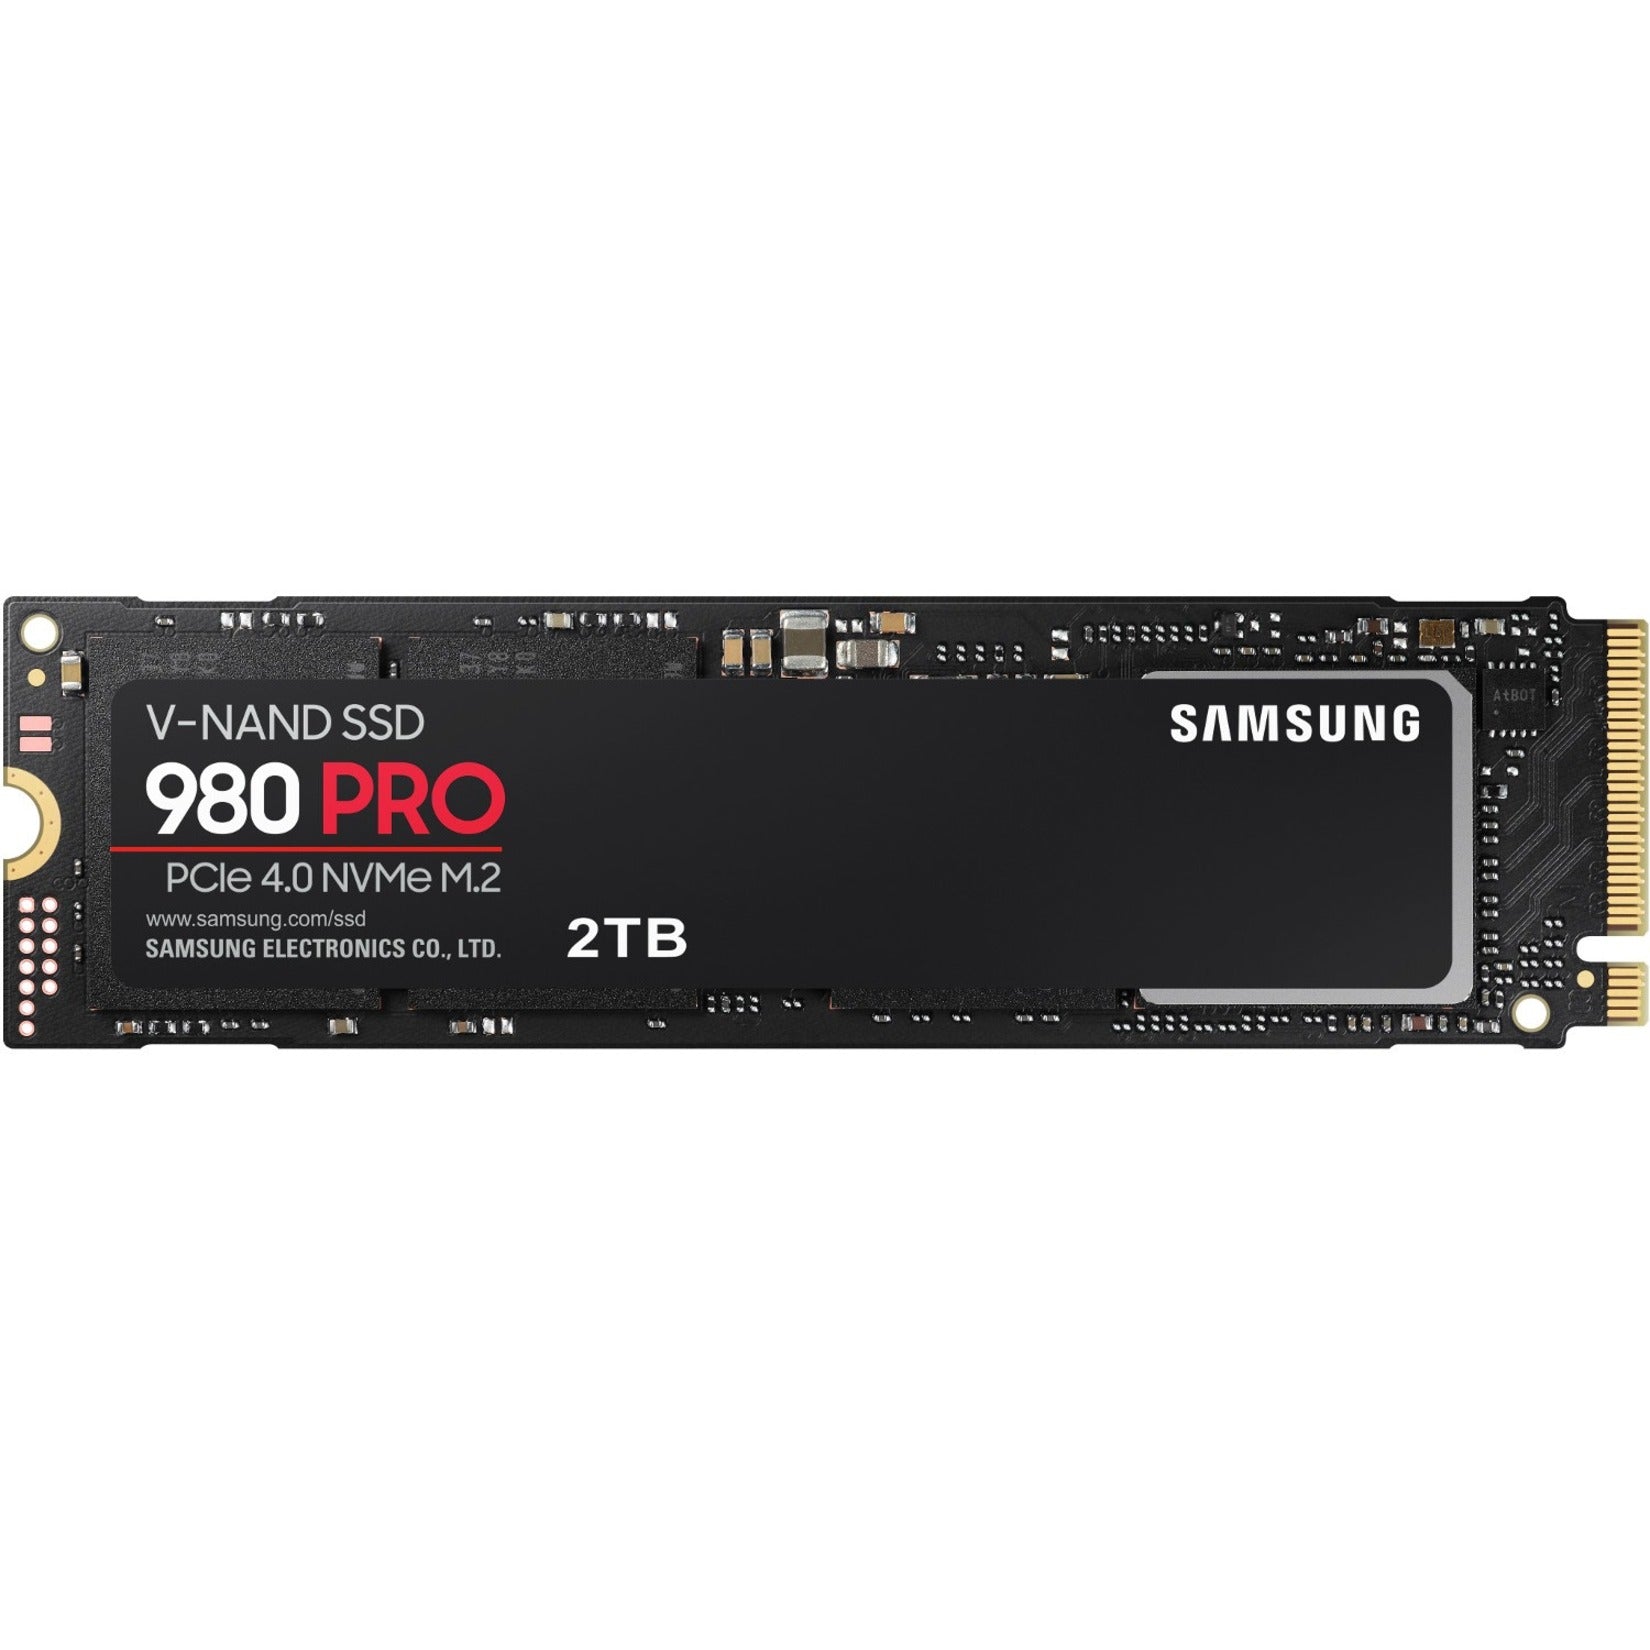 Samsung MZ-V8P2T0B/AM 980 PRO PCIe 4.0 NVMe SSD 2TB, High-Speed Solid State Drive for Desktop PC and Notebook